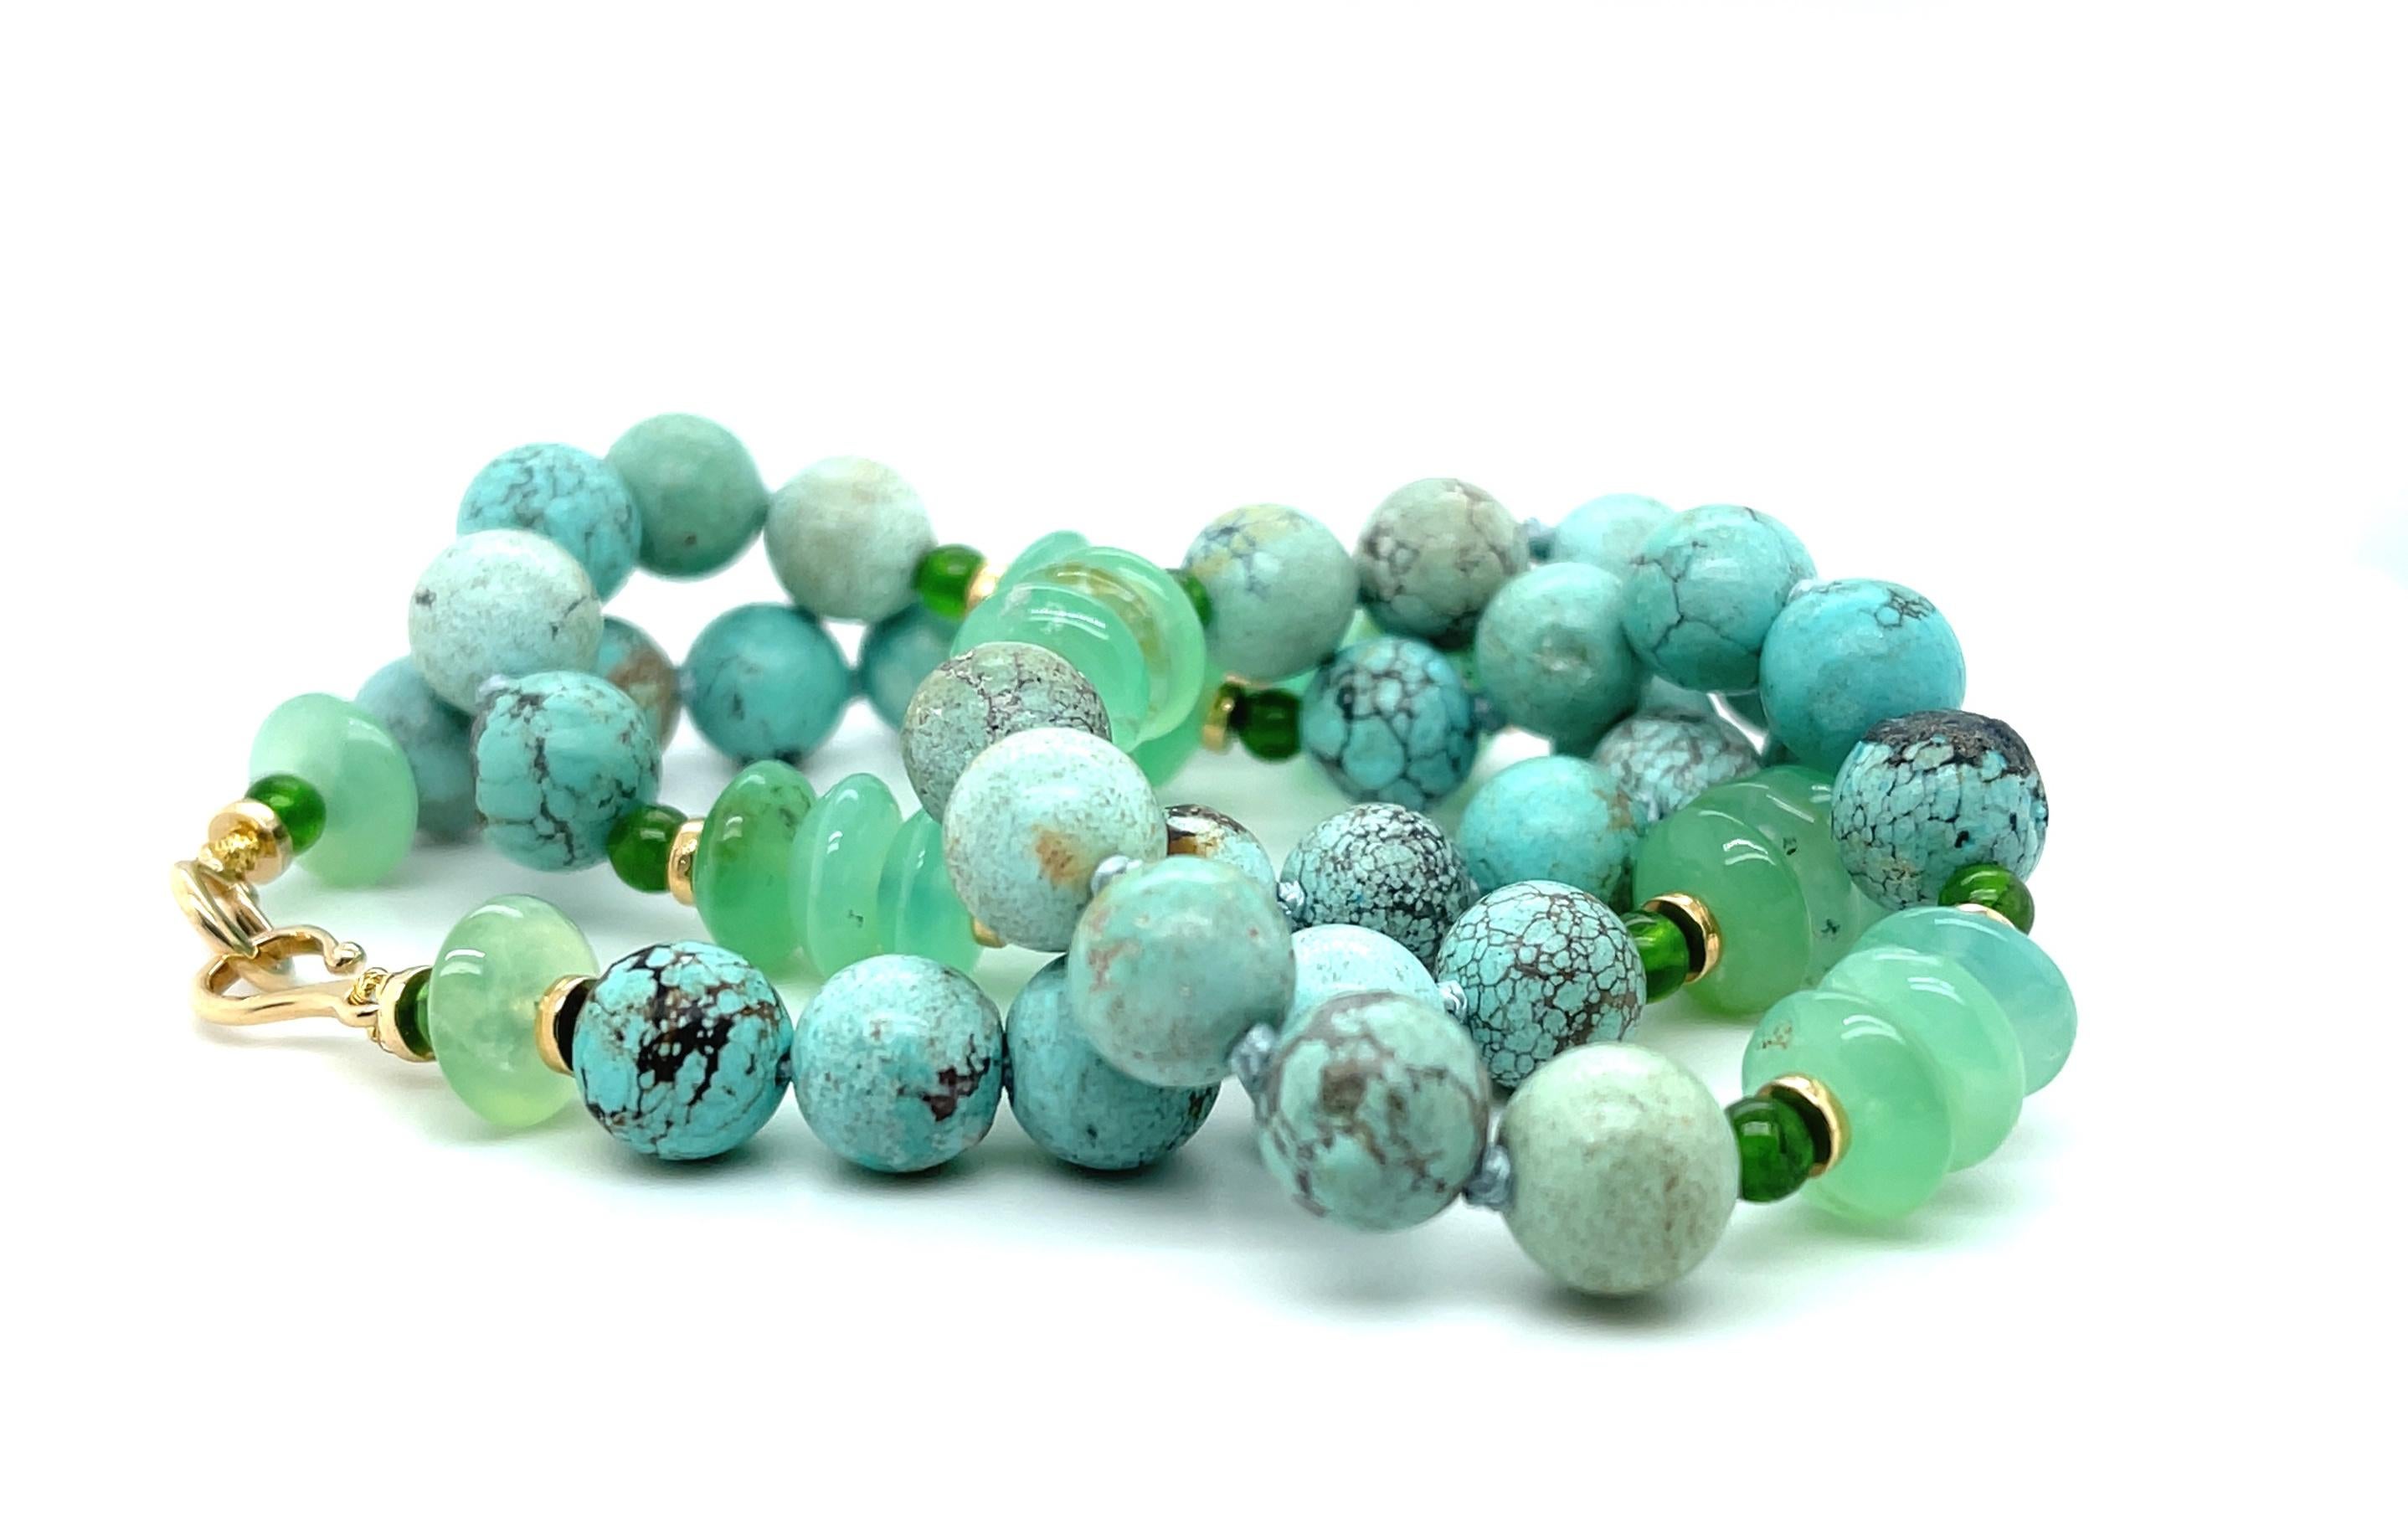 Artisan Turquoise, Chrome Diopside and Chrysoprase Necklace, 18 Inches